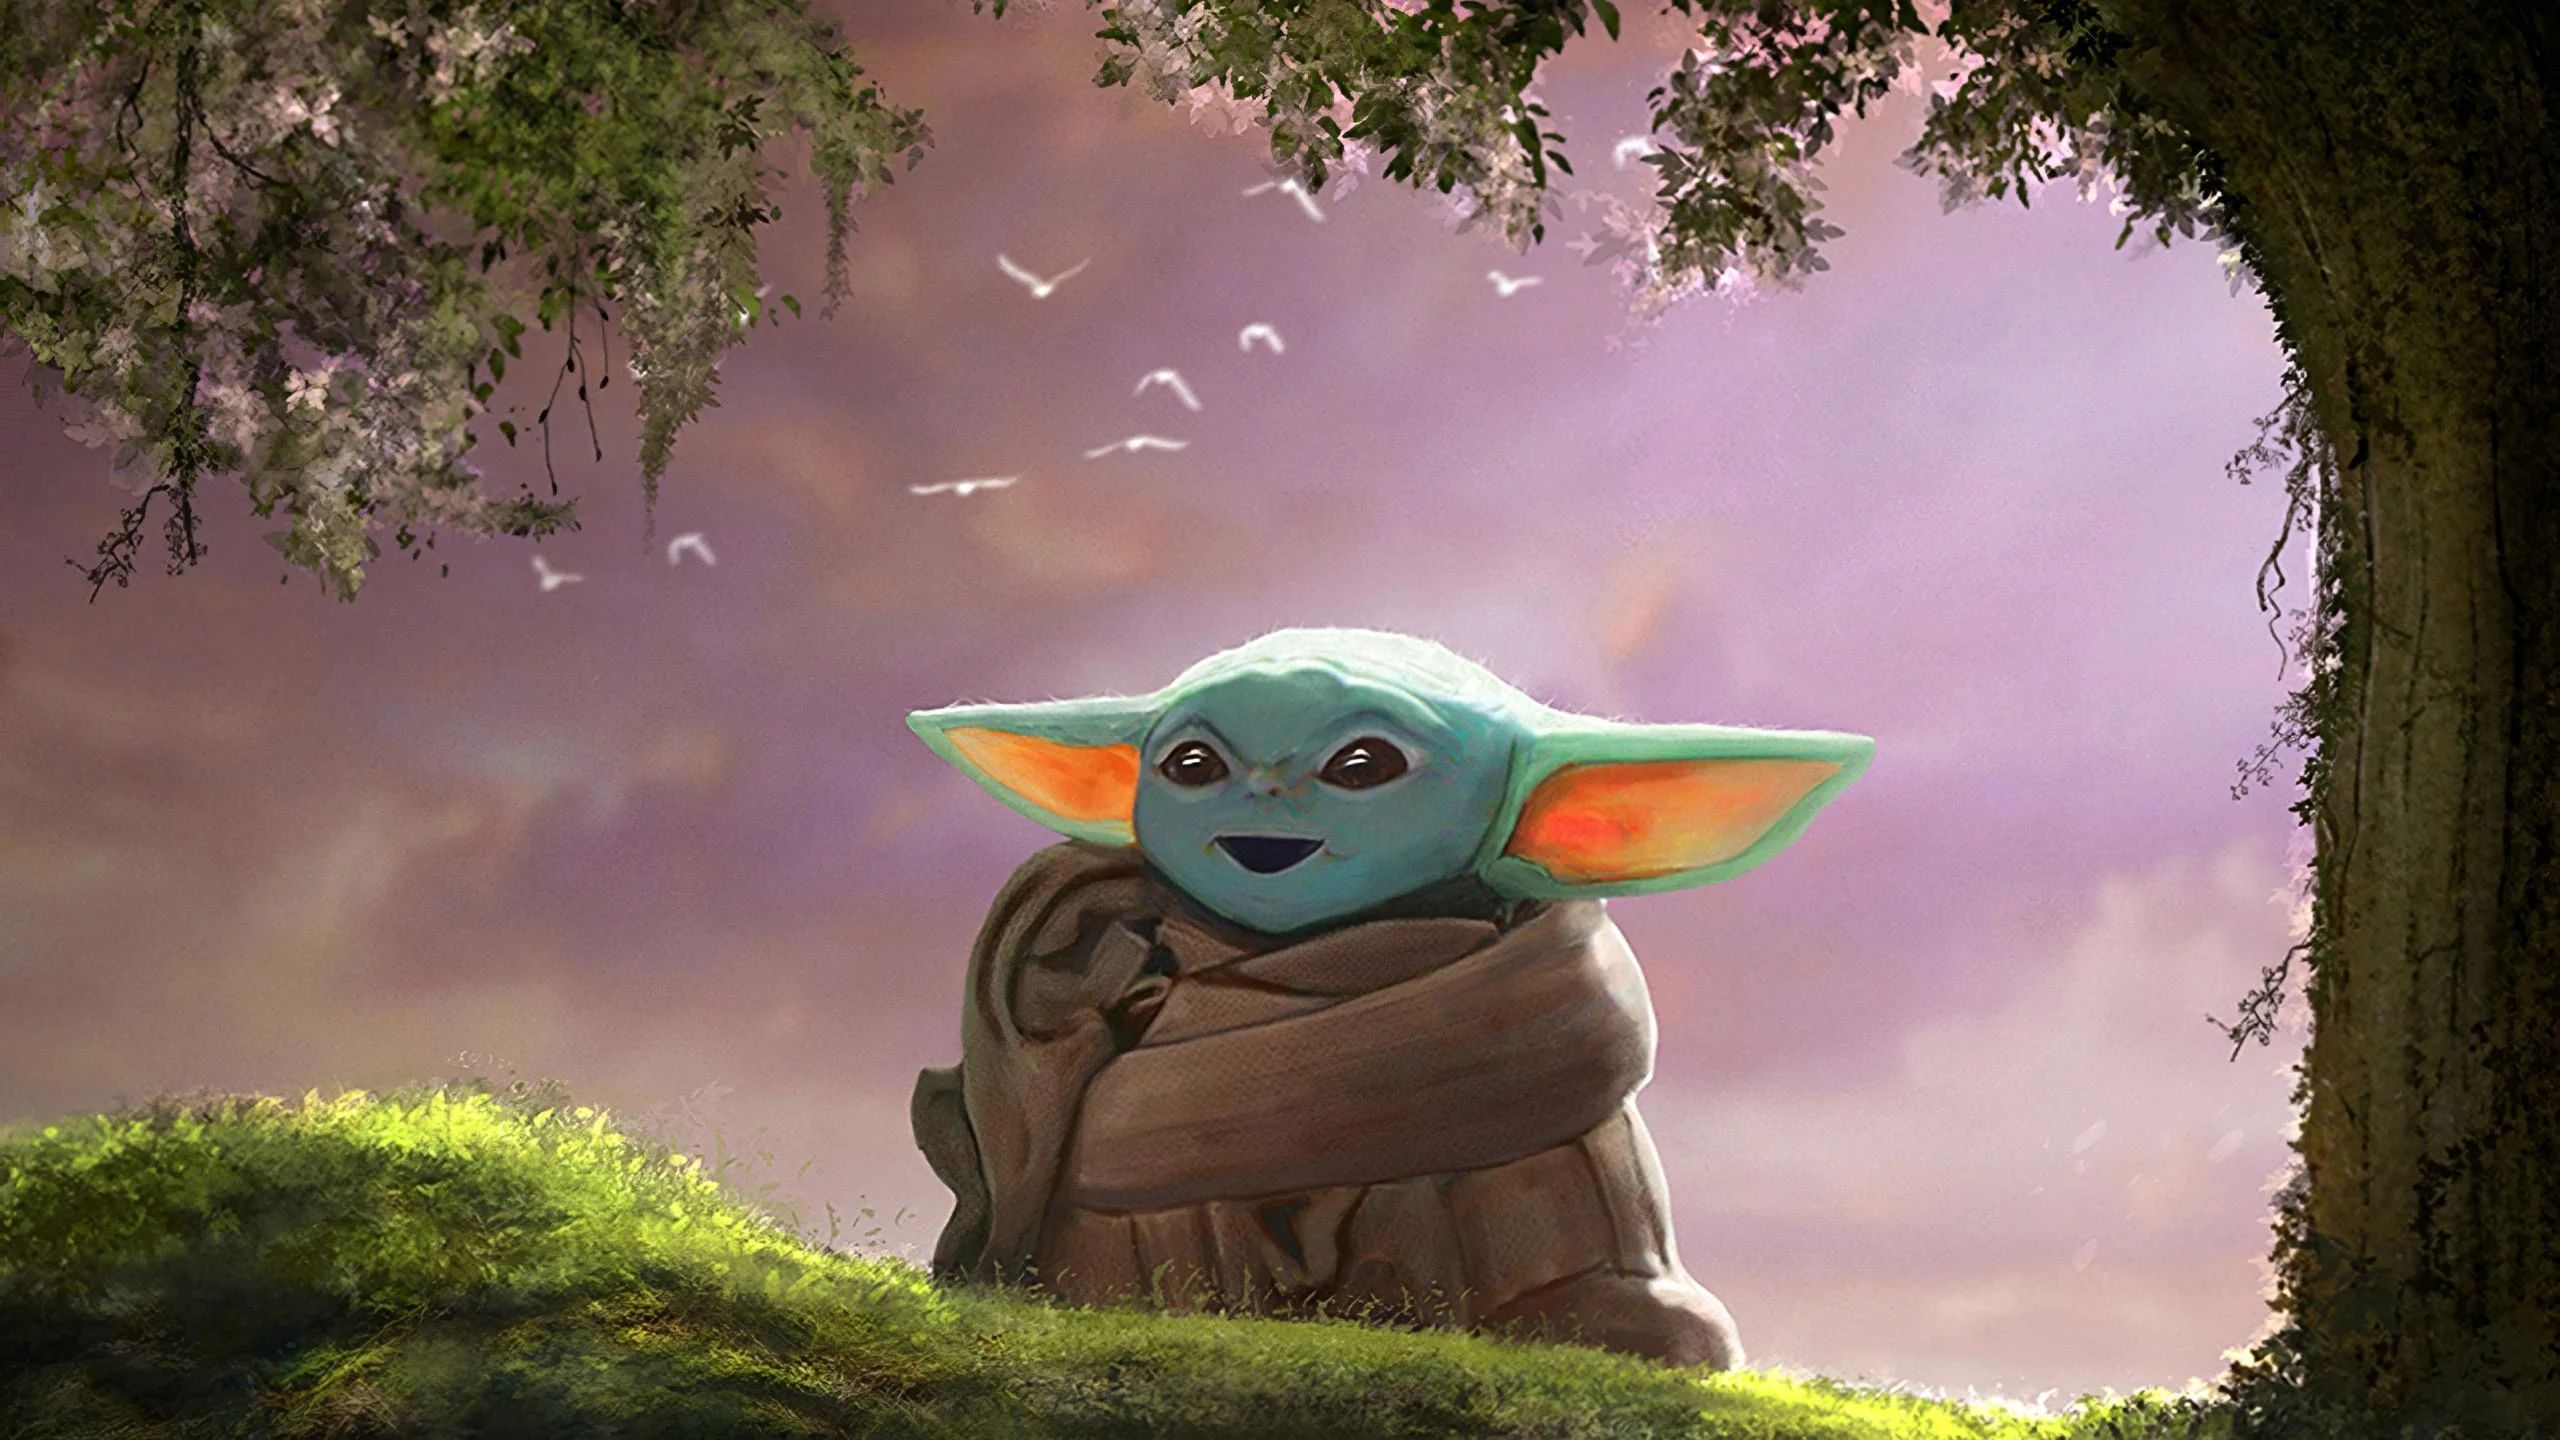 Baby Yoda, also known as The Child, is the protagonist of The Mandalorian, a Star Wars character who is known for his cuteness and popularity. - Baby Yoda